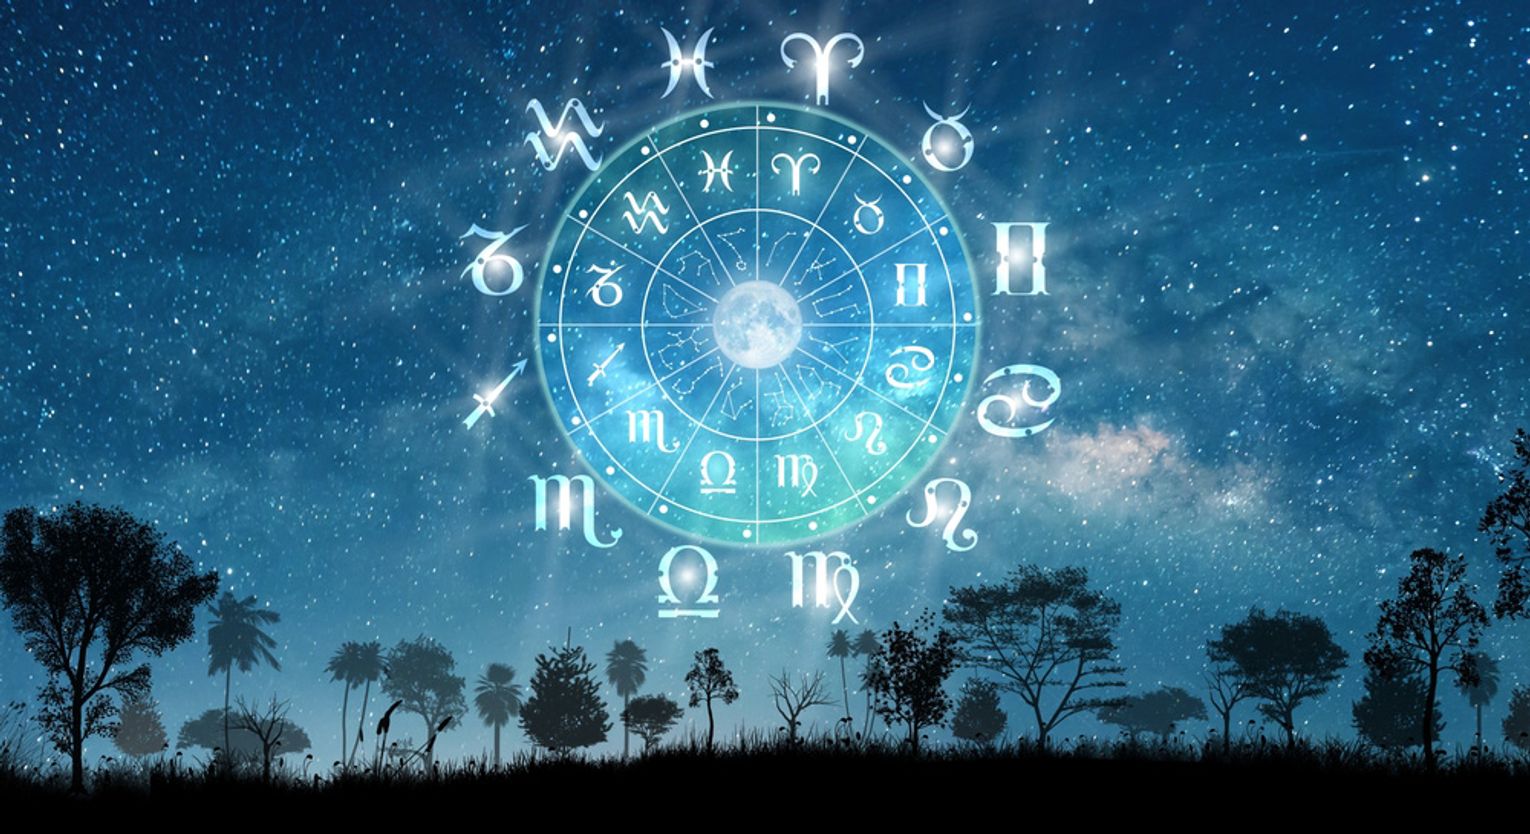 Star Signs and Predetermination